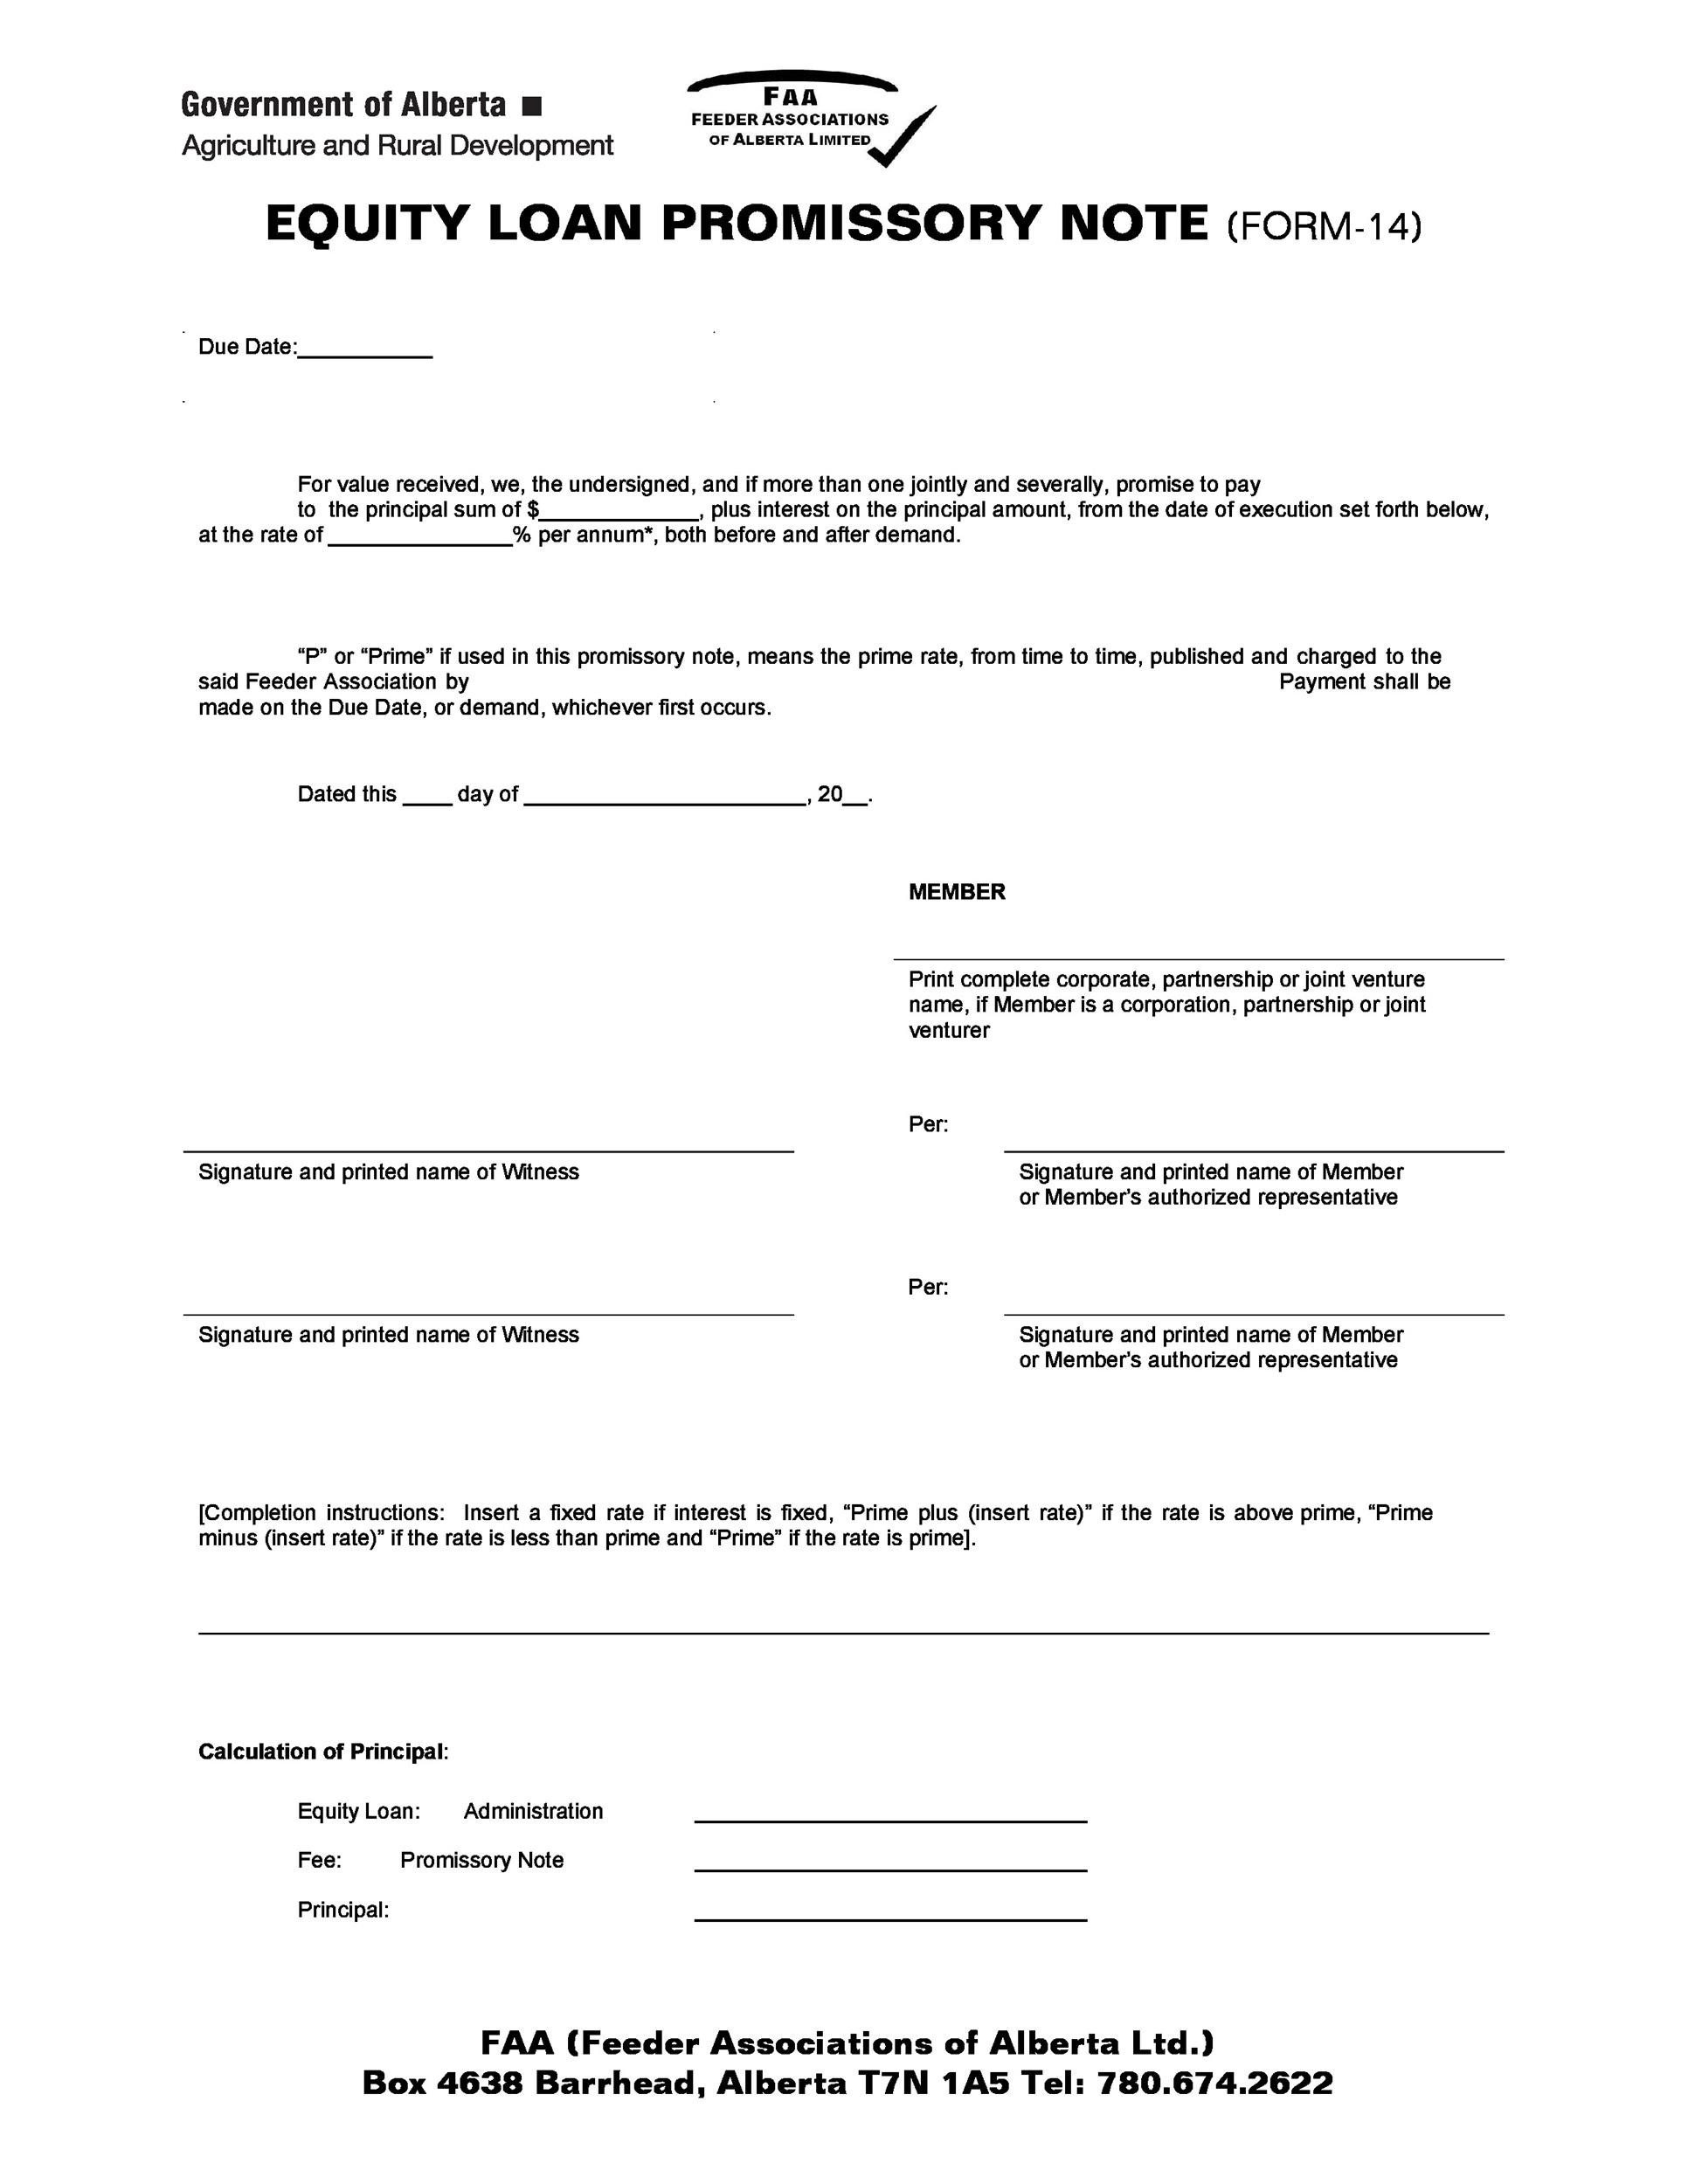 Simple Interest Promissory Note Template